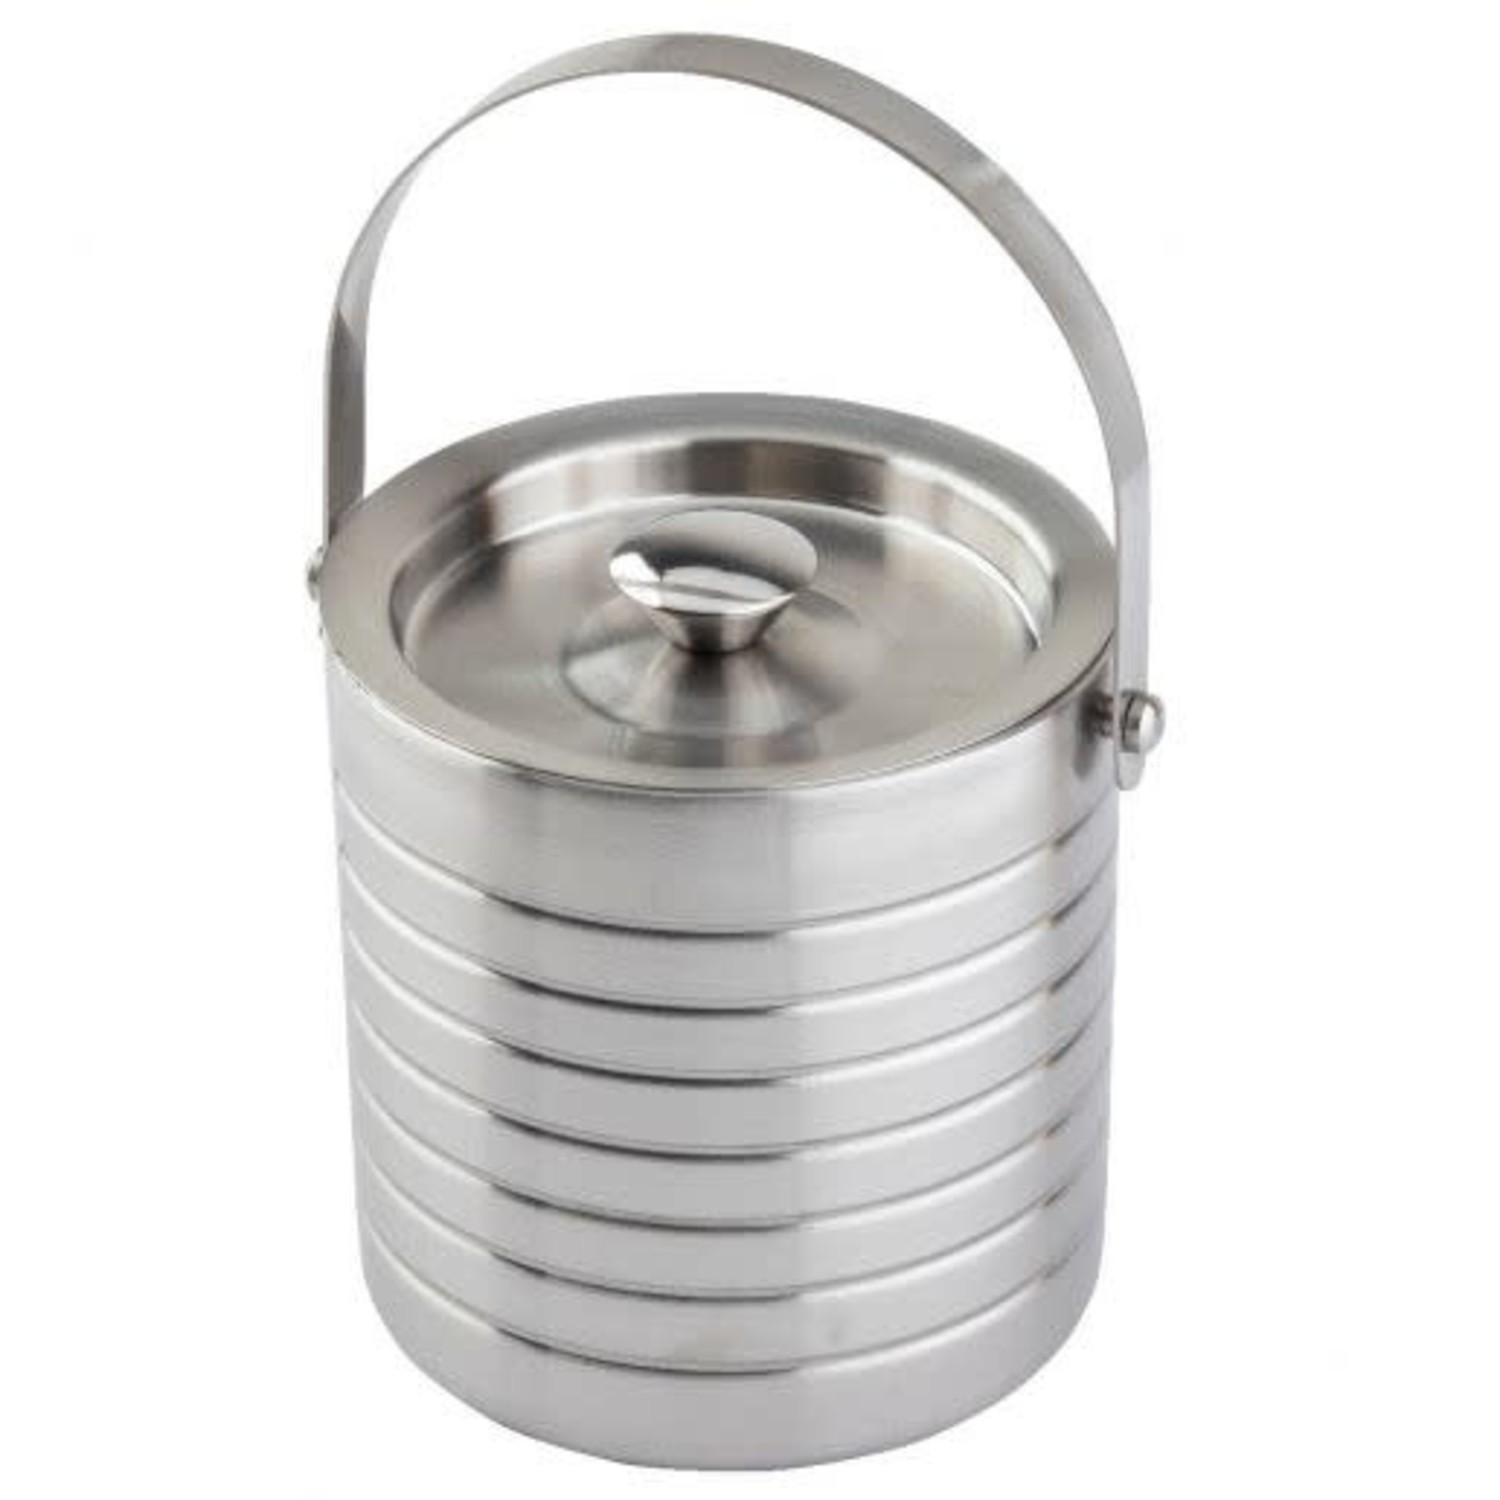 Galvanized Ice Bucket with Scoop and Lid - Whisk